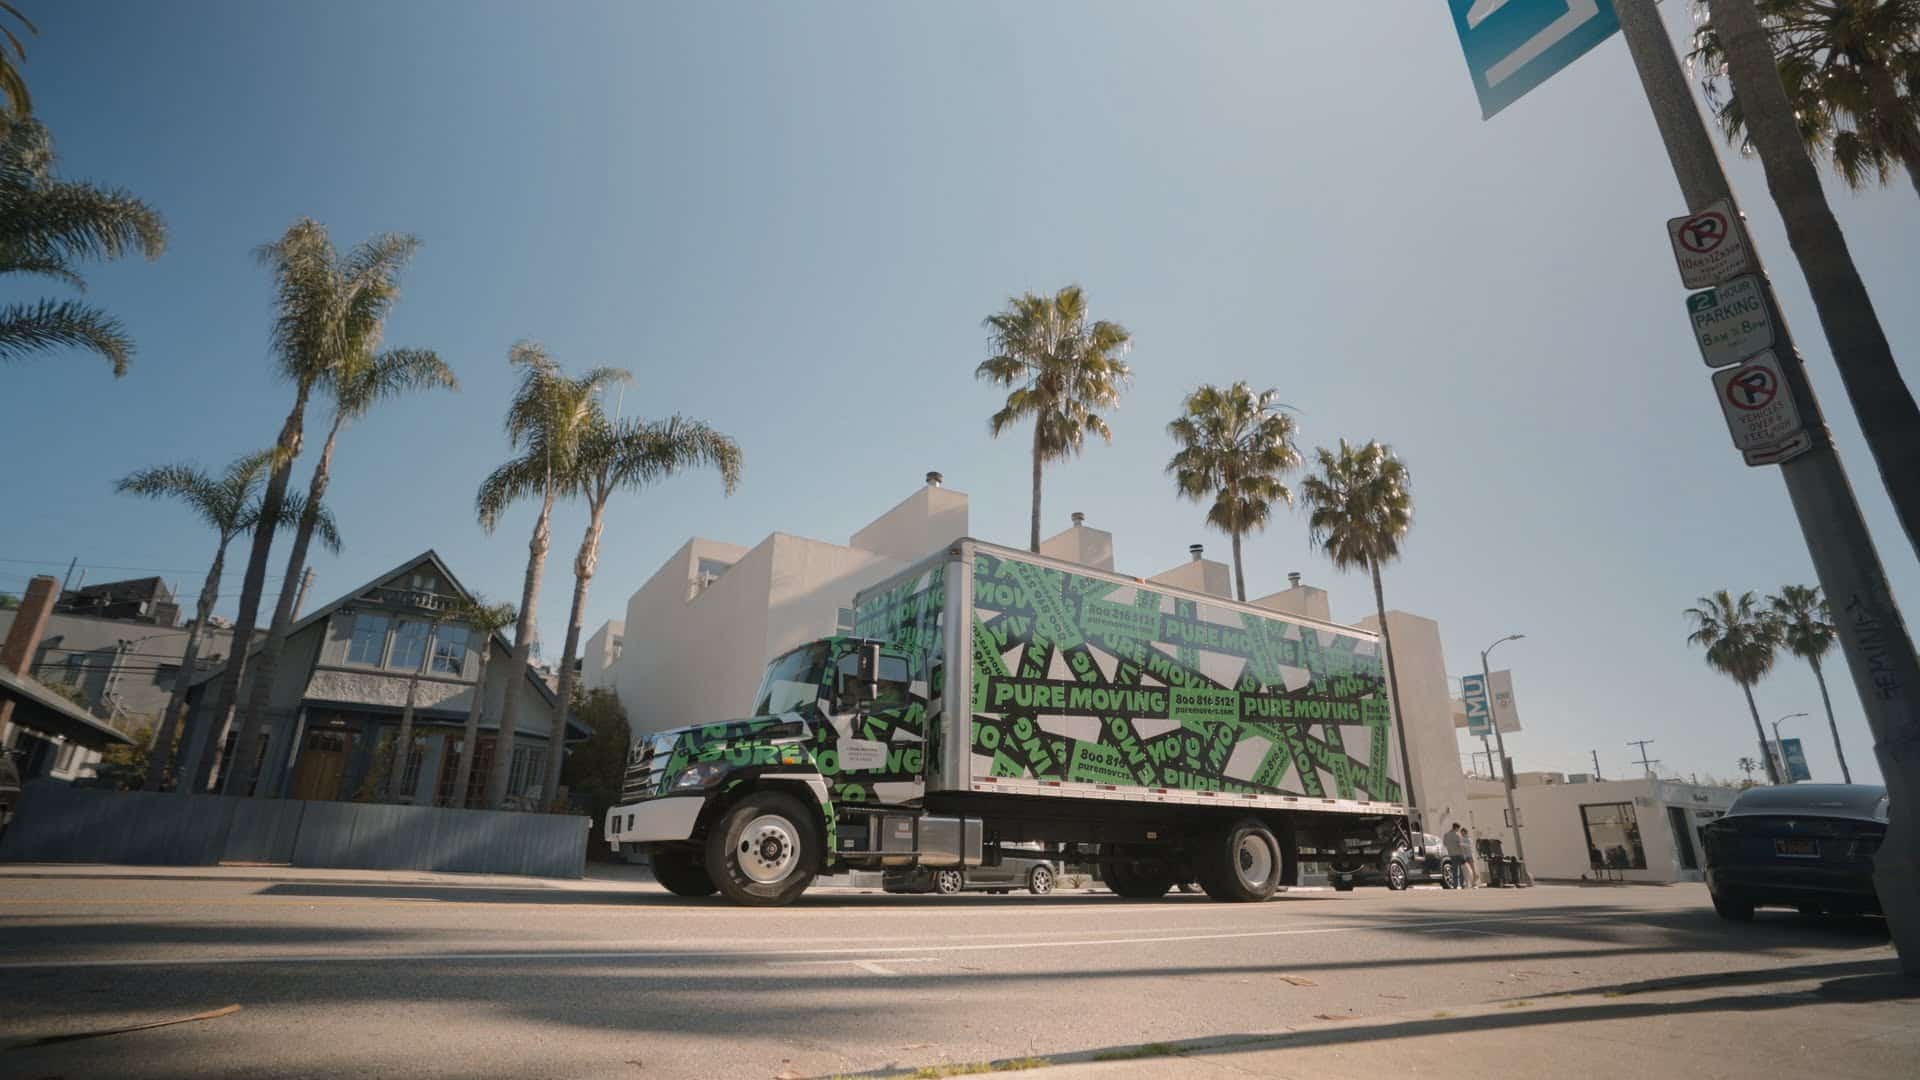 A sunny street scene with tall palm trees and a moving company truck turning at an intersection.